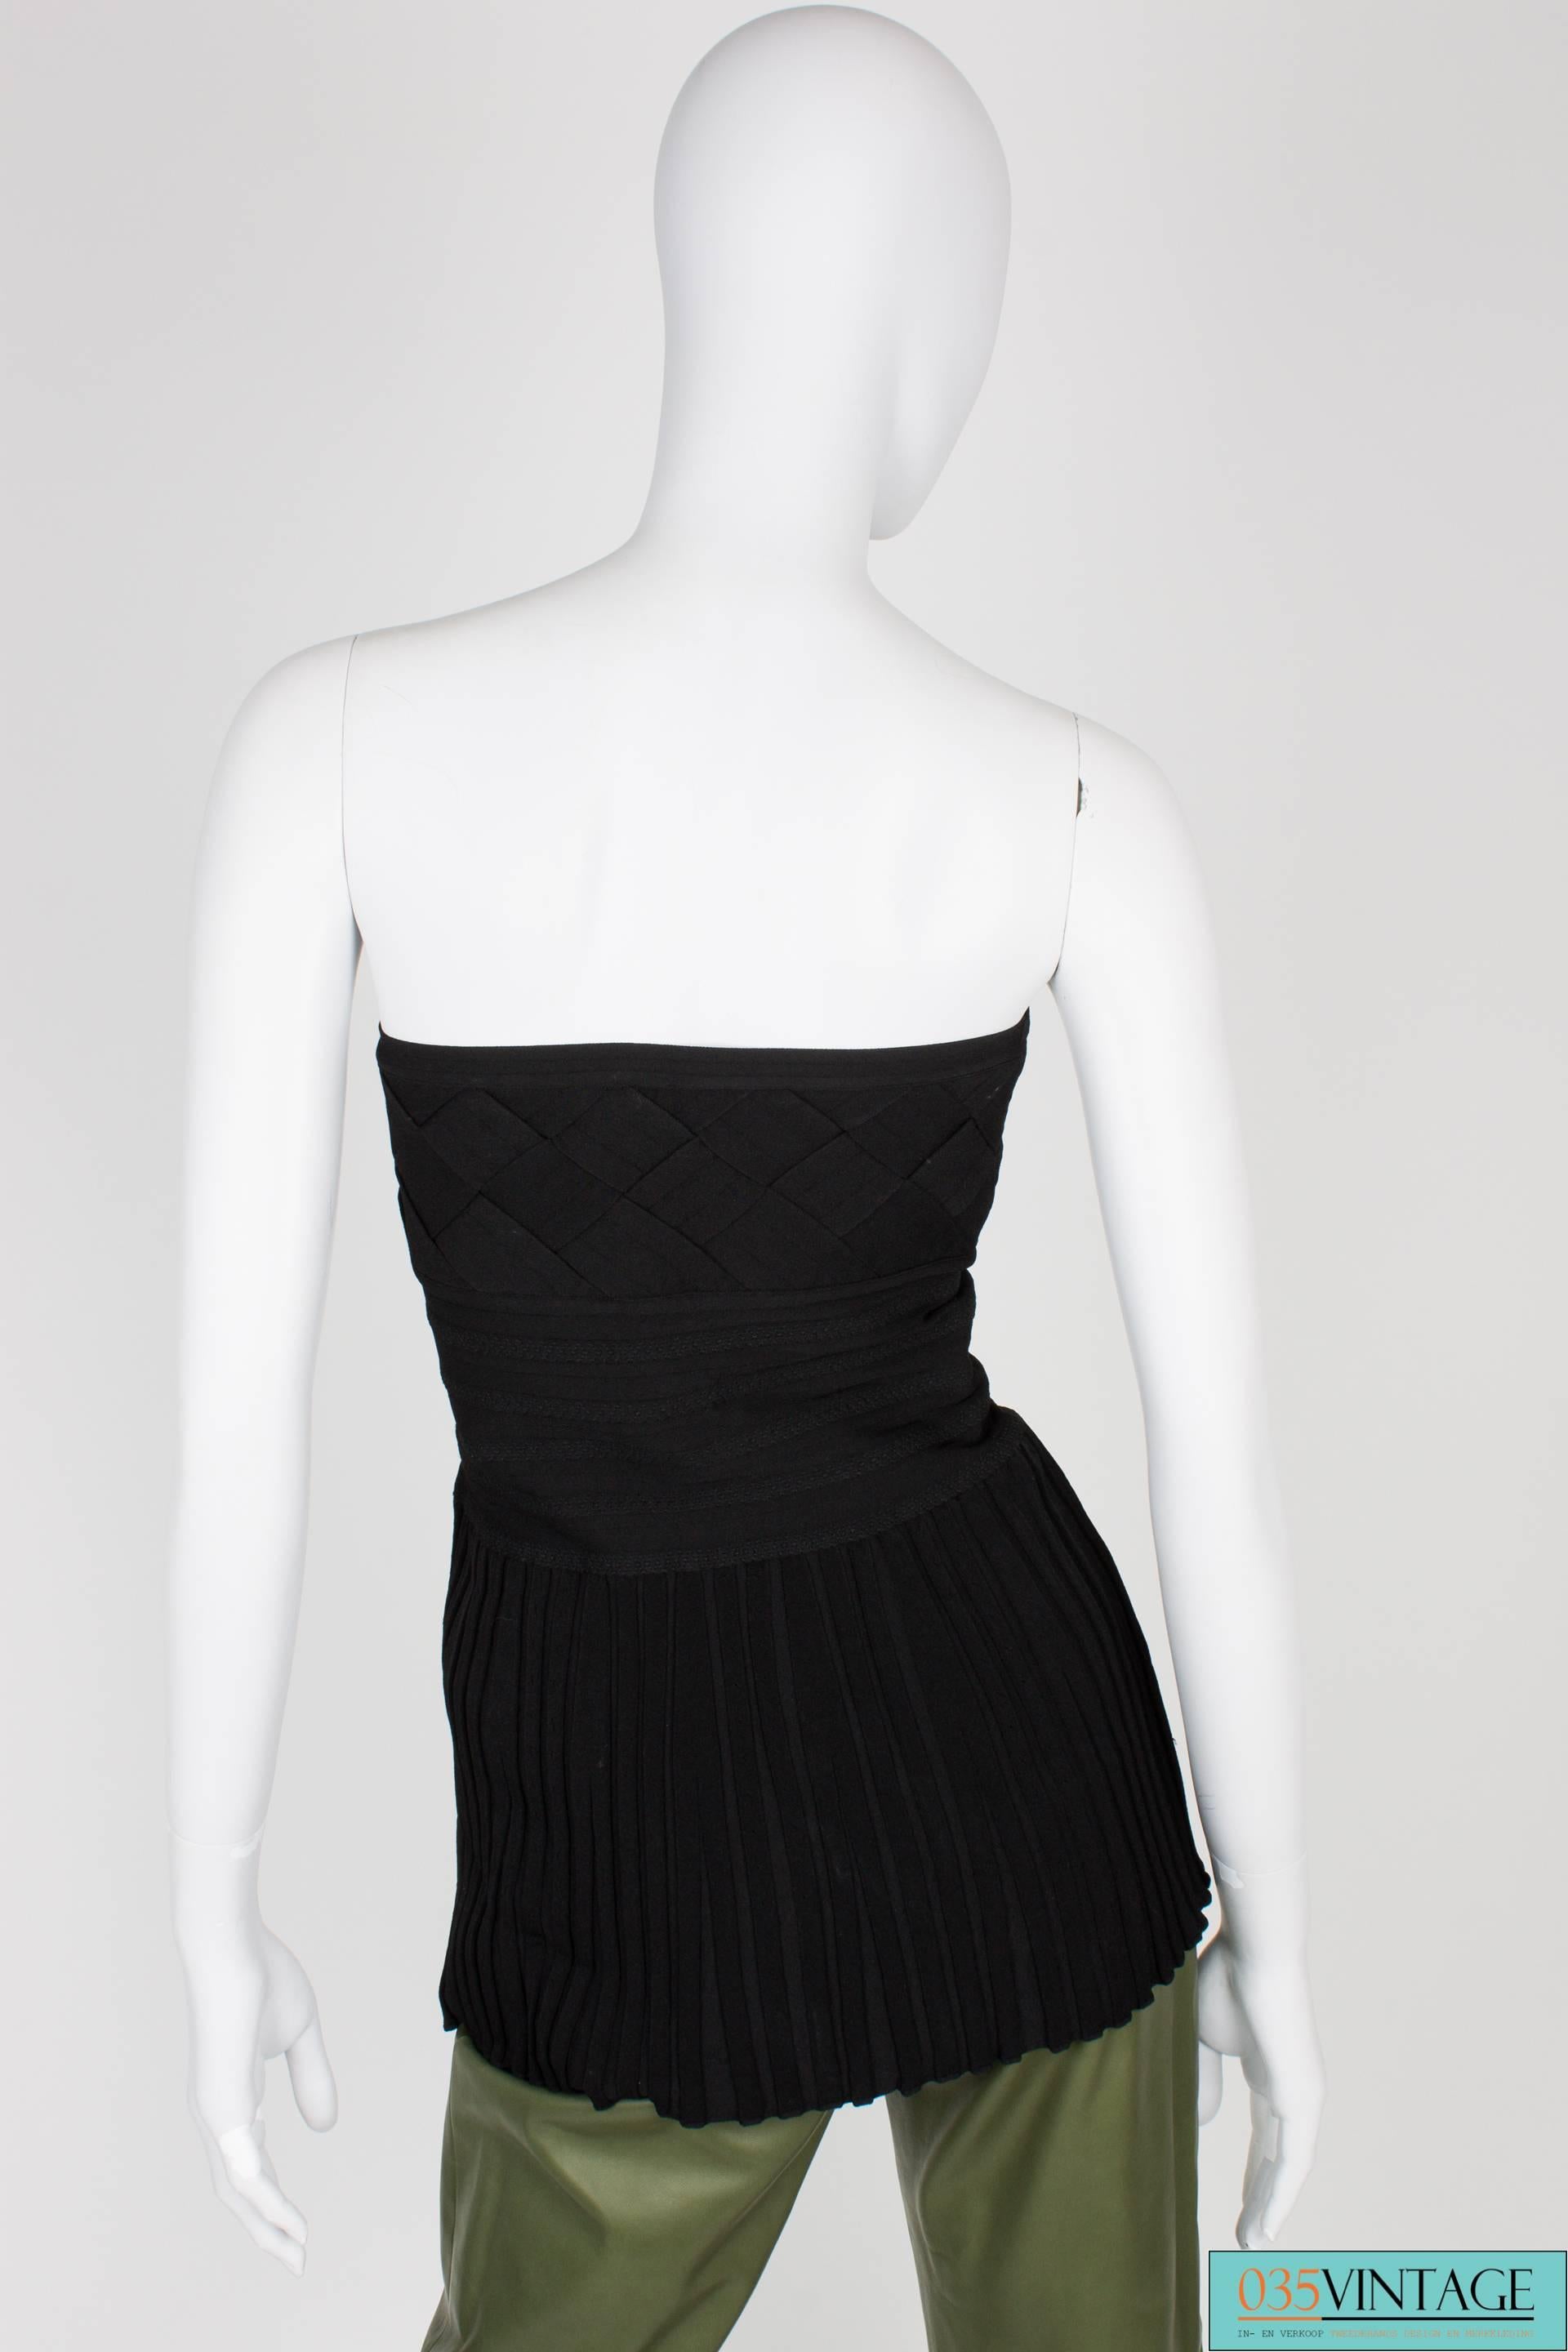 Beautiful strapless top by Chanel, this one goes with anything!

The upper part is woven, wide straps were used. The part in the middle creates firmness and is very tight to the body. The lower part is loose and pleated. A matte silver Chanel